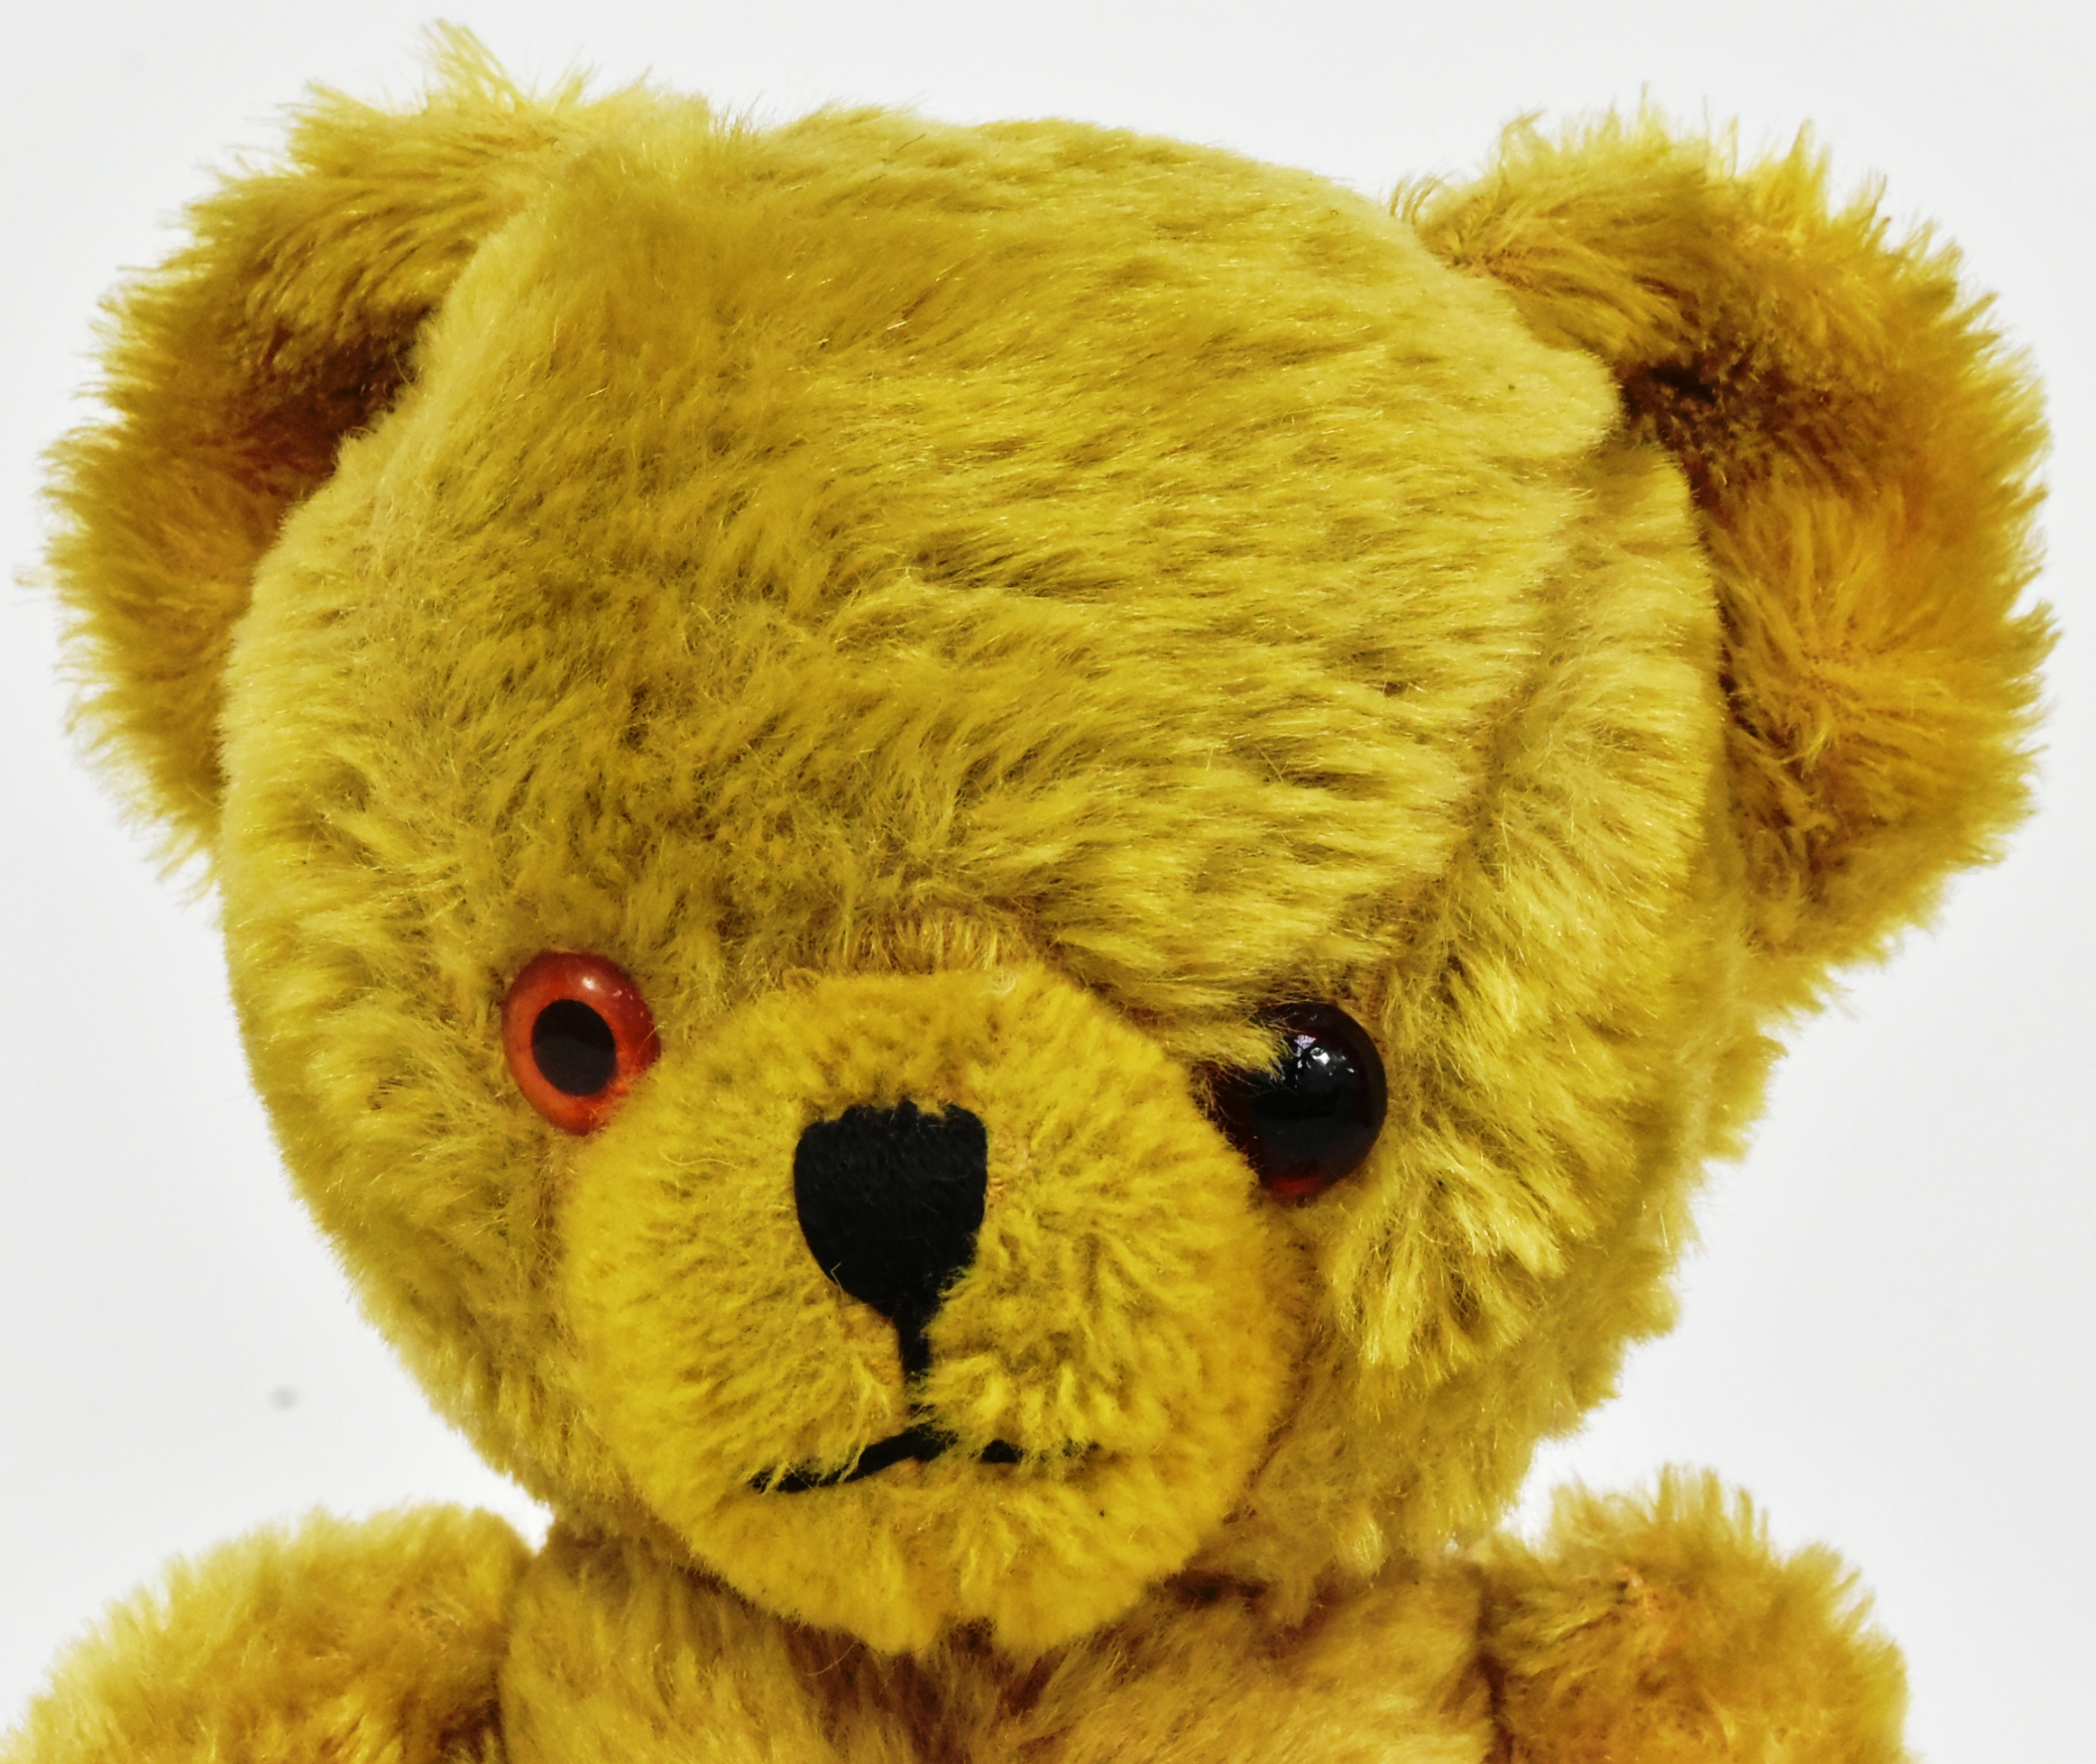 TEDDY BEARS - VINTAGE MERRYTHOUGHT CHEEKY BEAR - Image 2 of 5